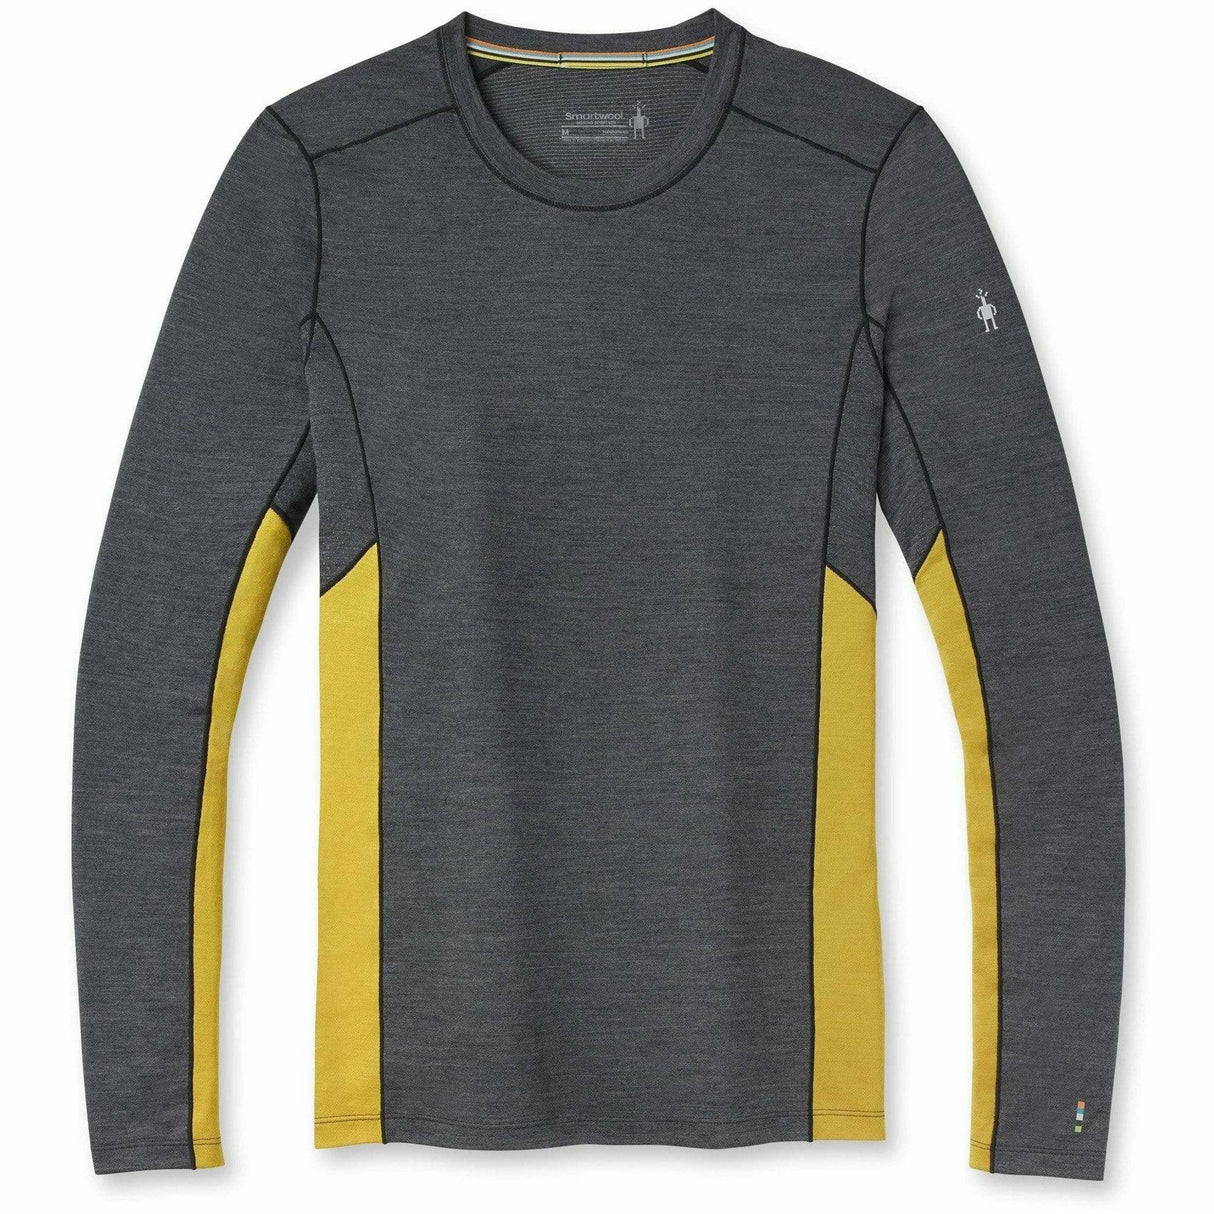 Smartwool Mens Merino Sport Long-Sleeve Crew  -  Small / Charcoal Heather/Golden Olive